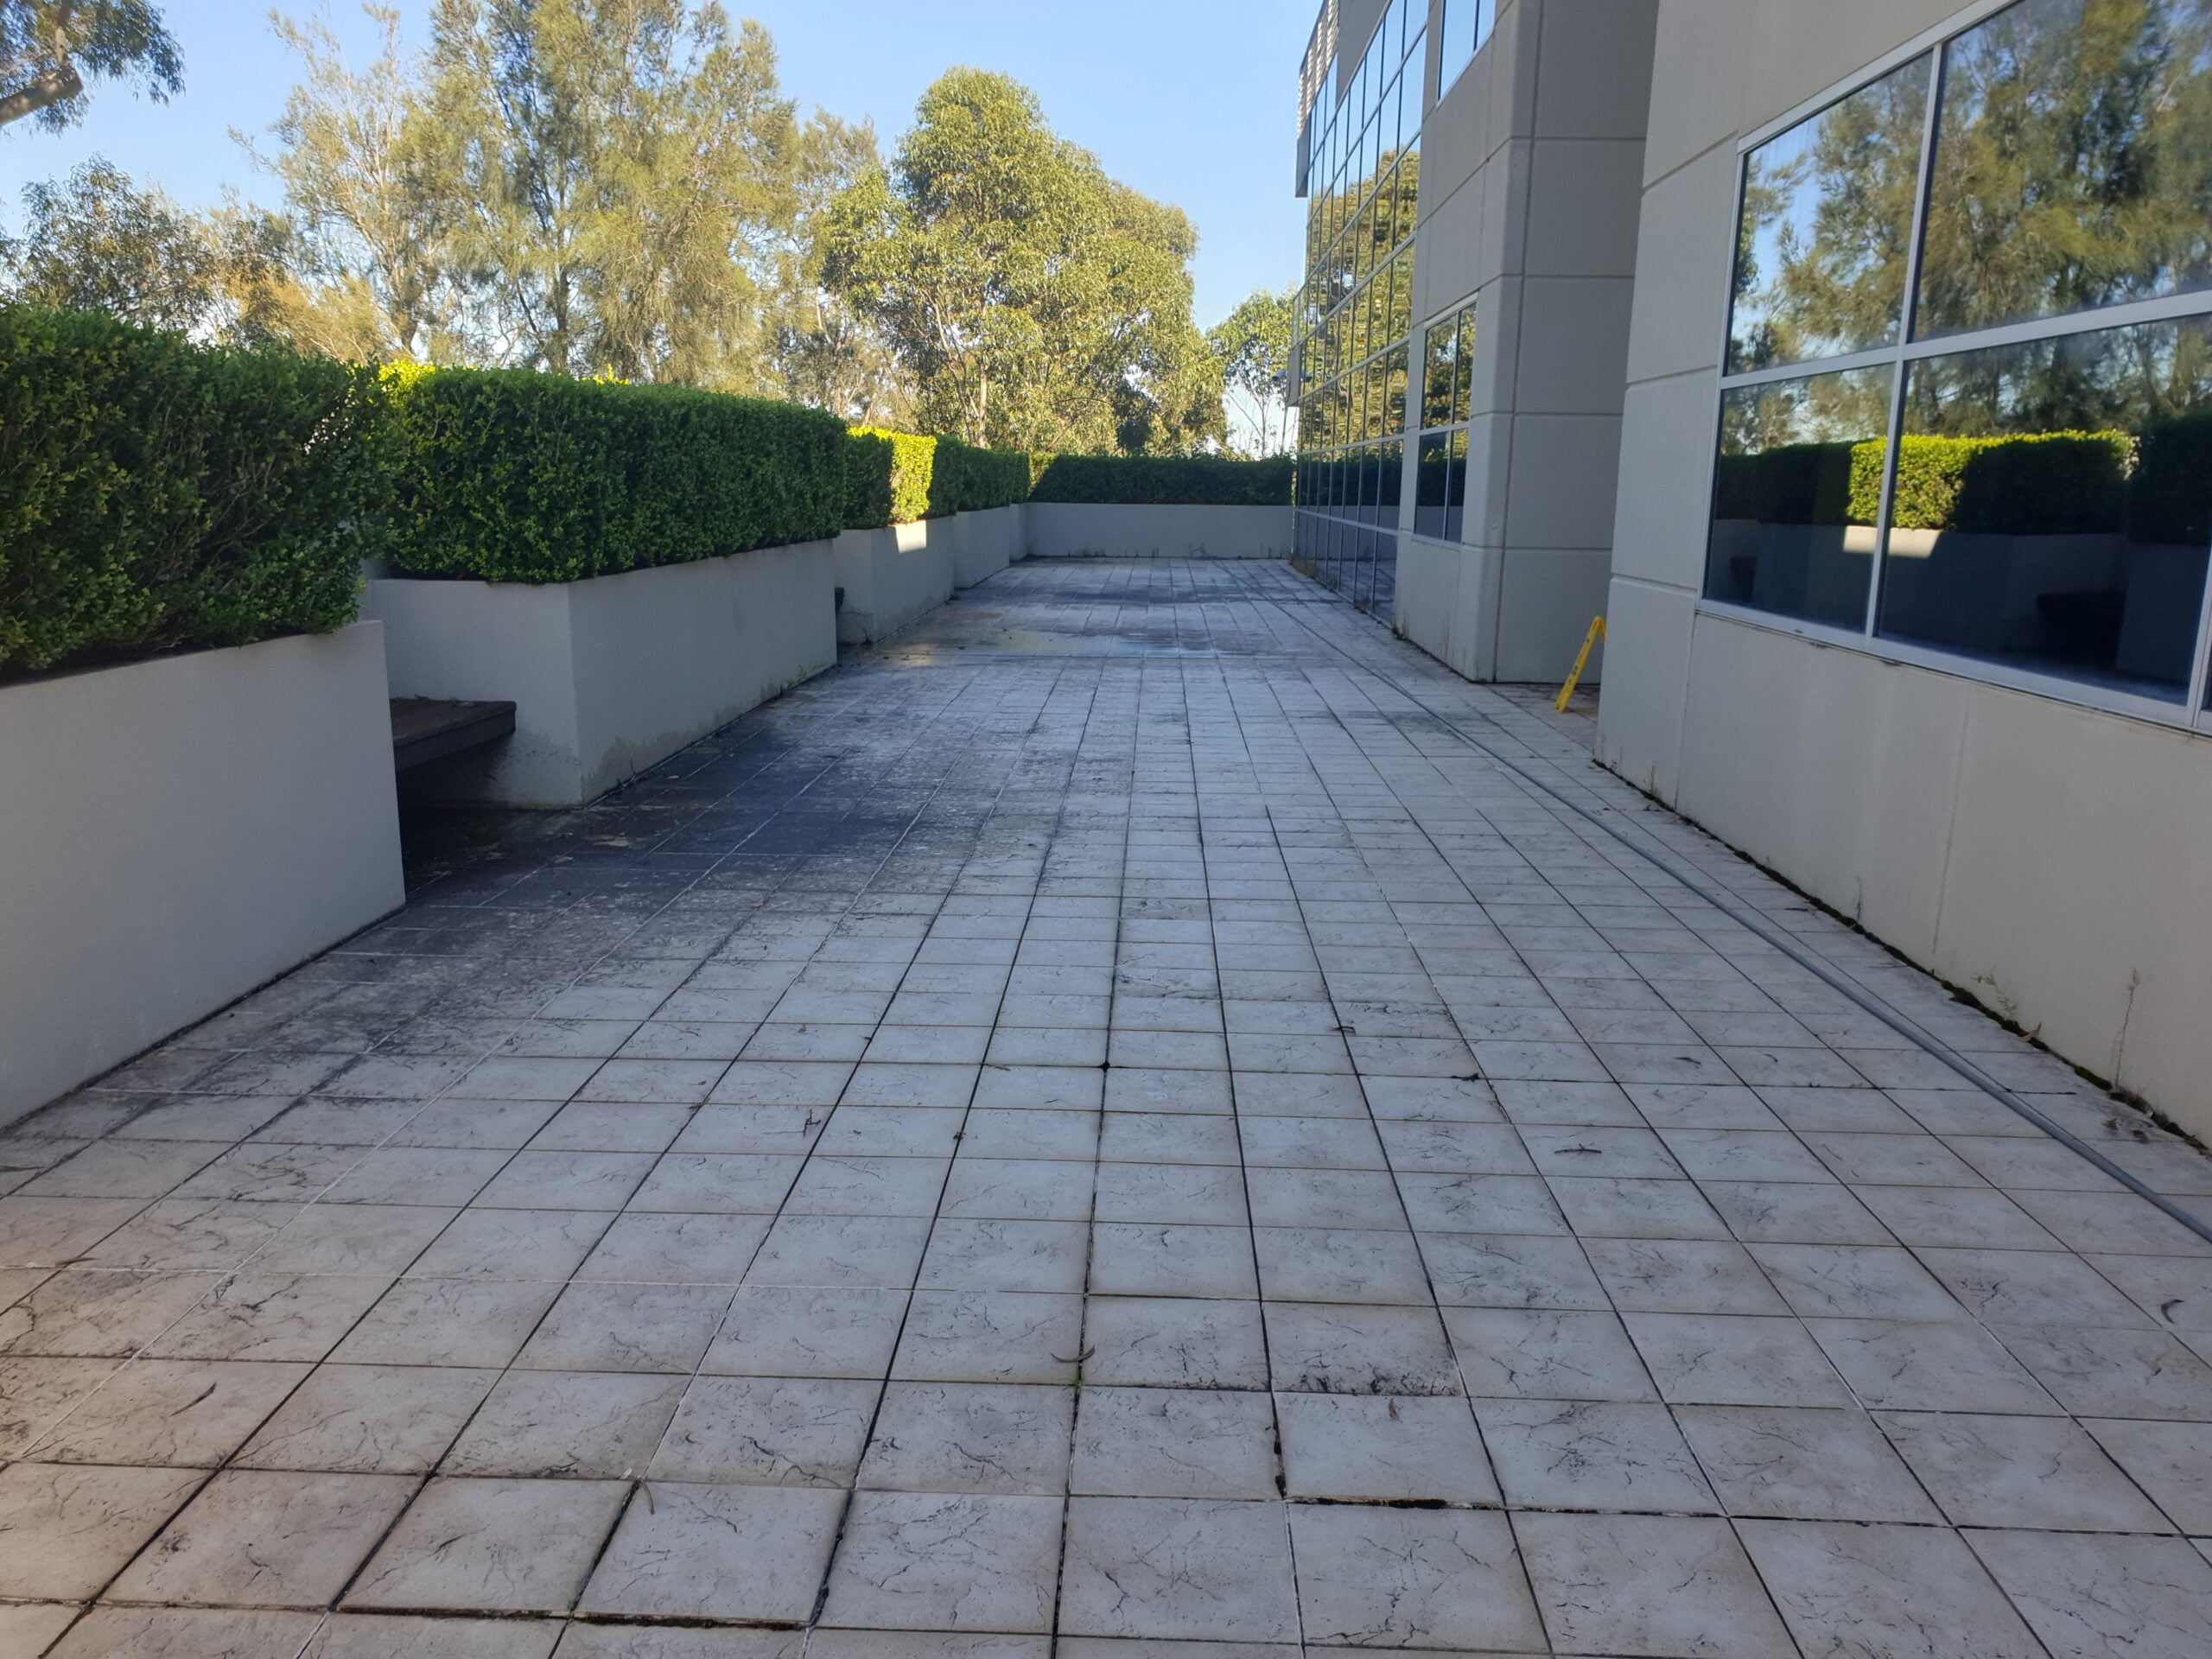 Commercial Petes Pressure Cleaning and Washing Services